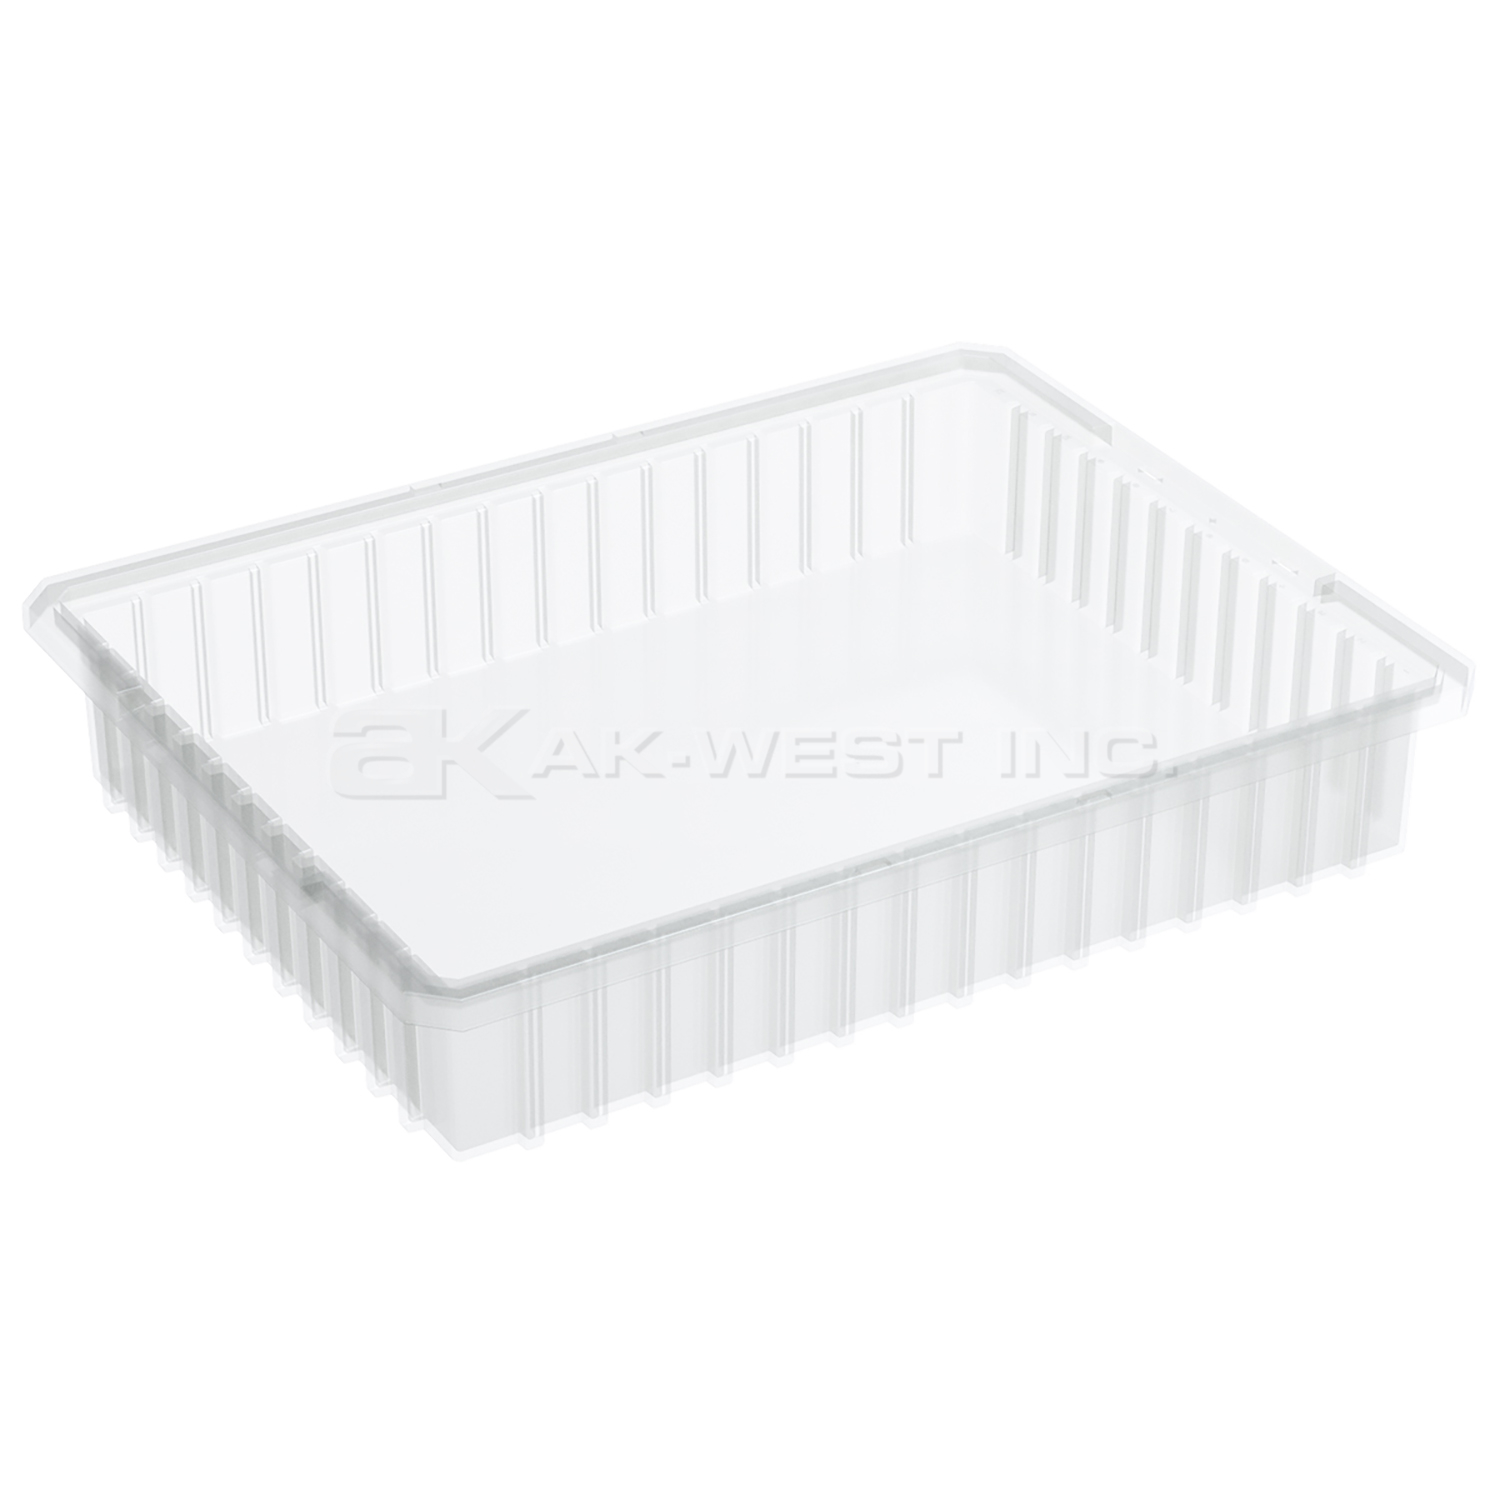 Clear, 22-3/8" x 17-3/8" x 4" Dividable Grid Container (6 Per Carton)